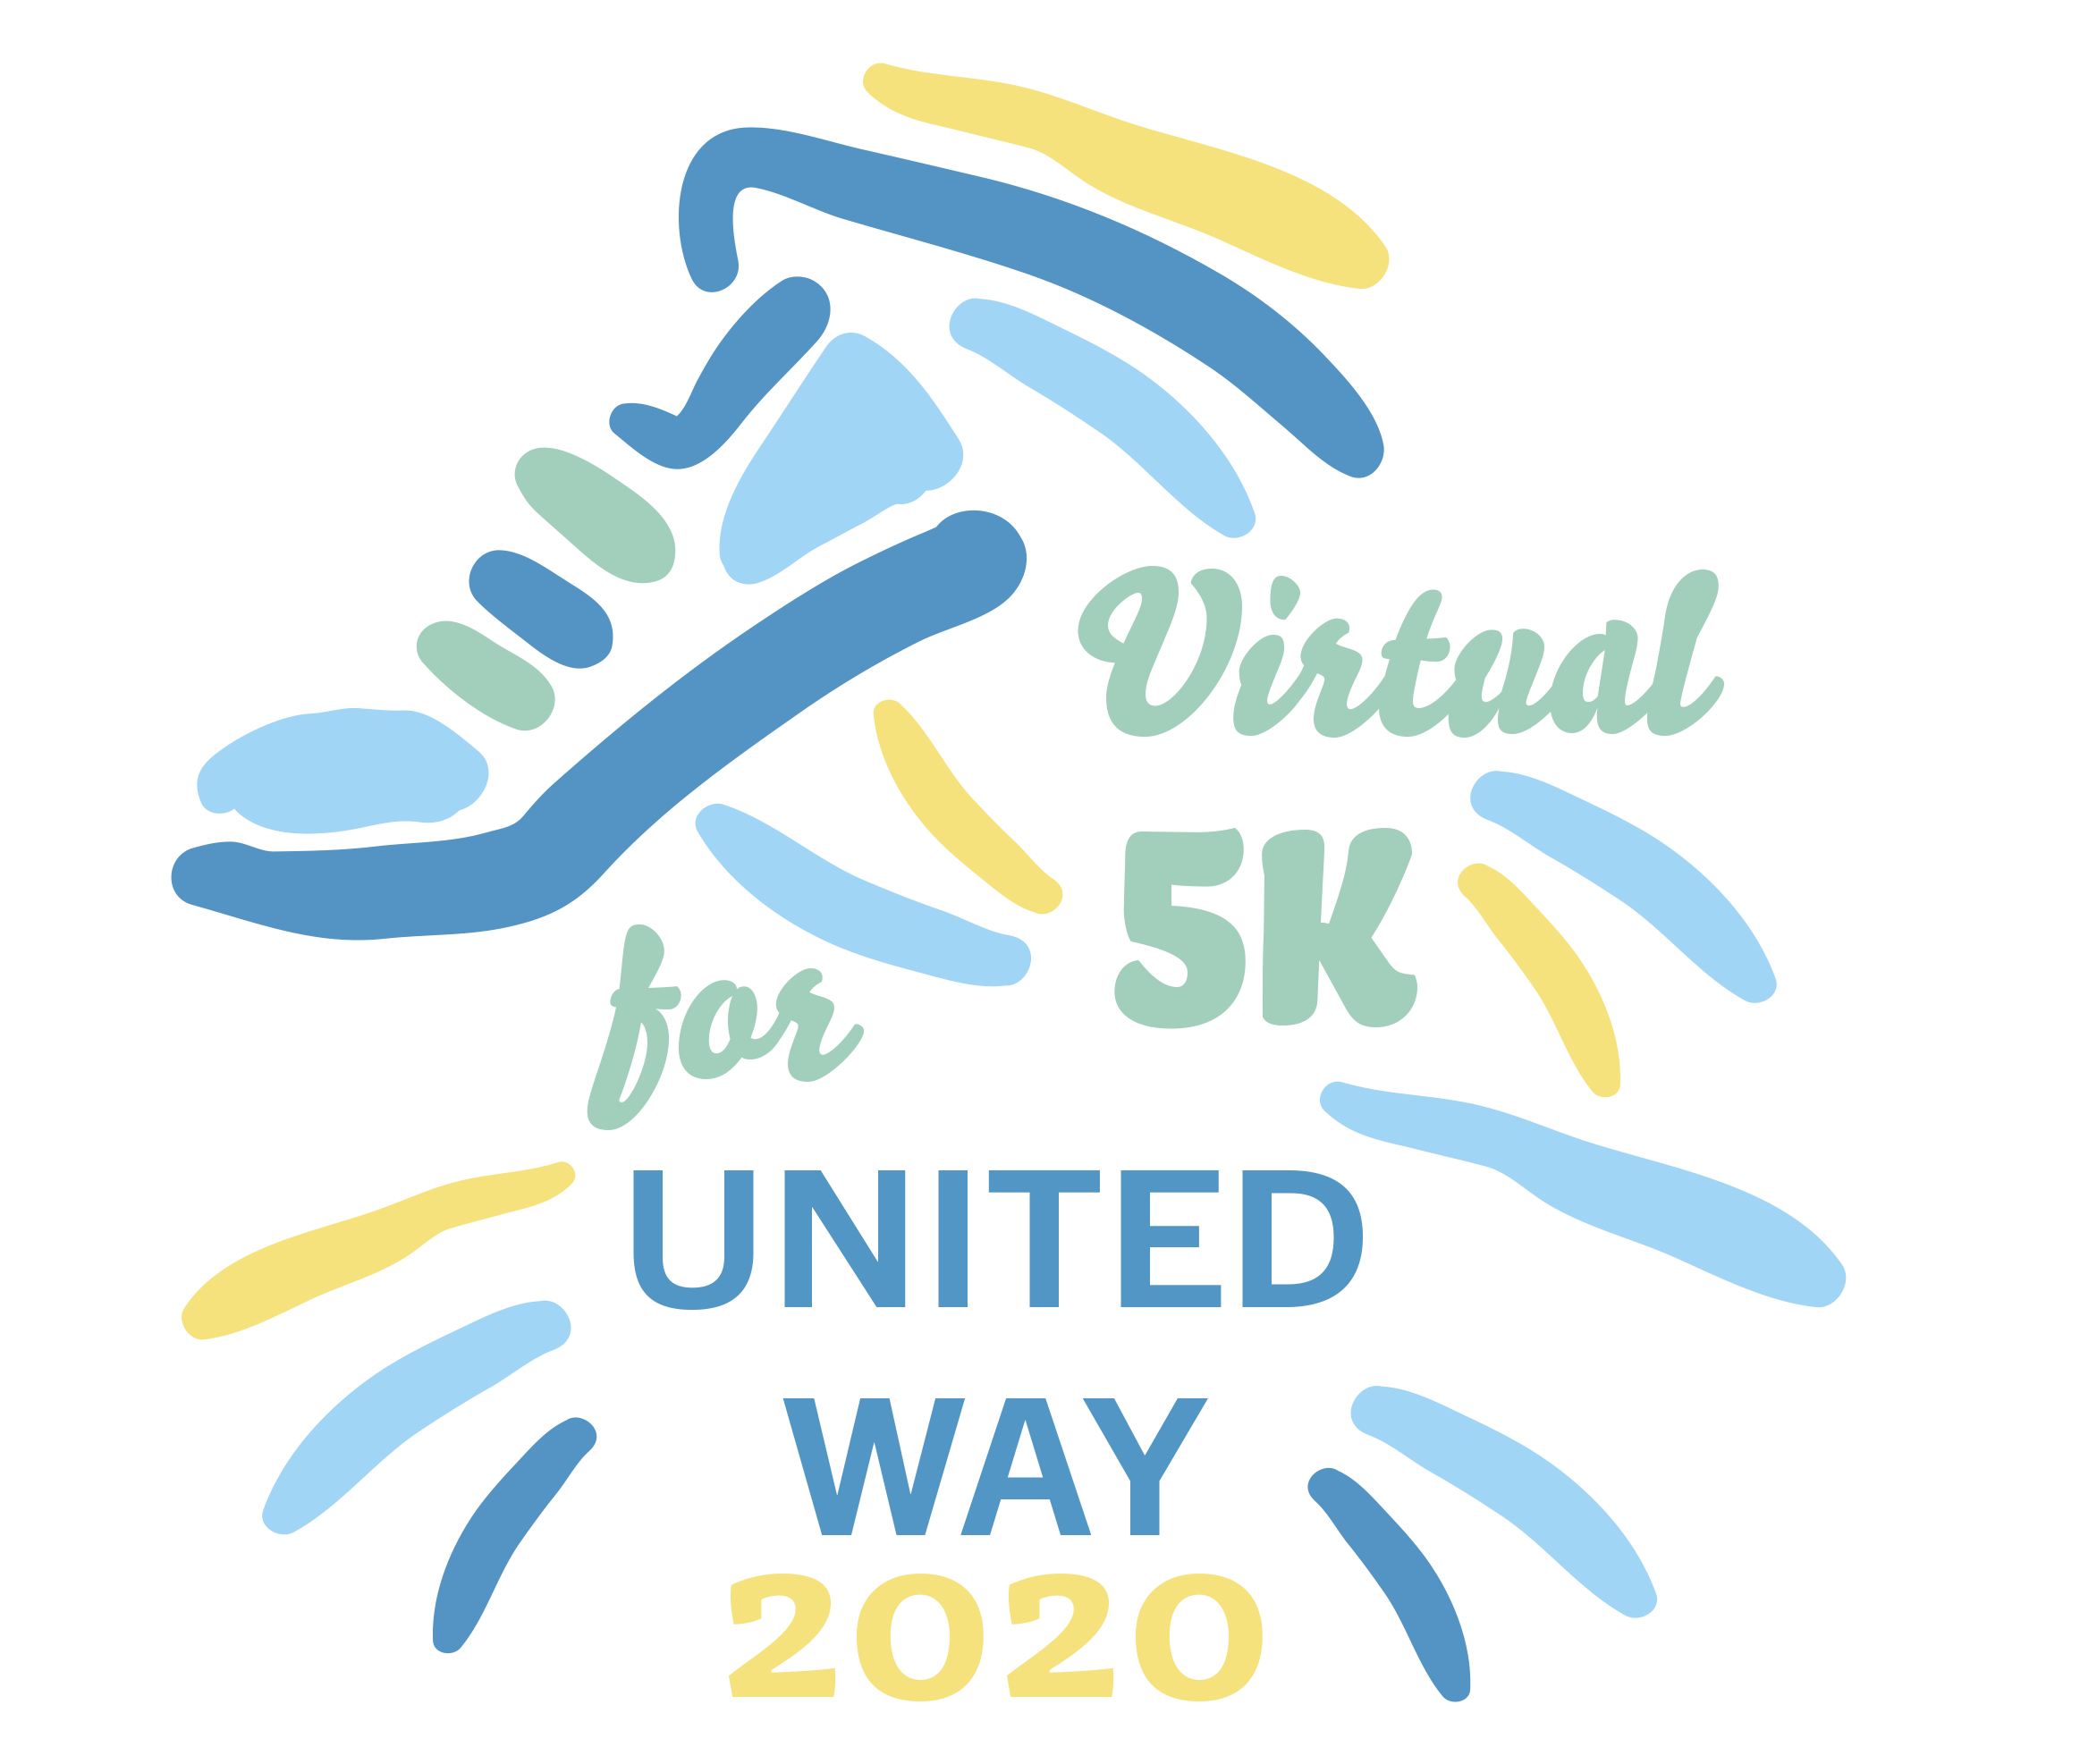 5k for United Way